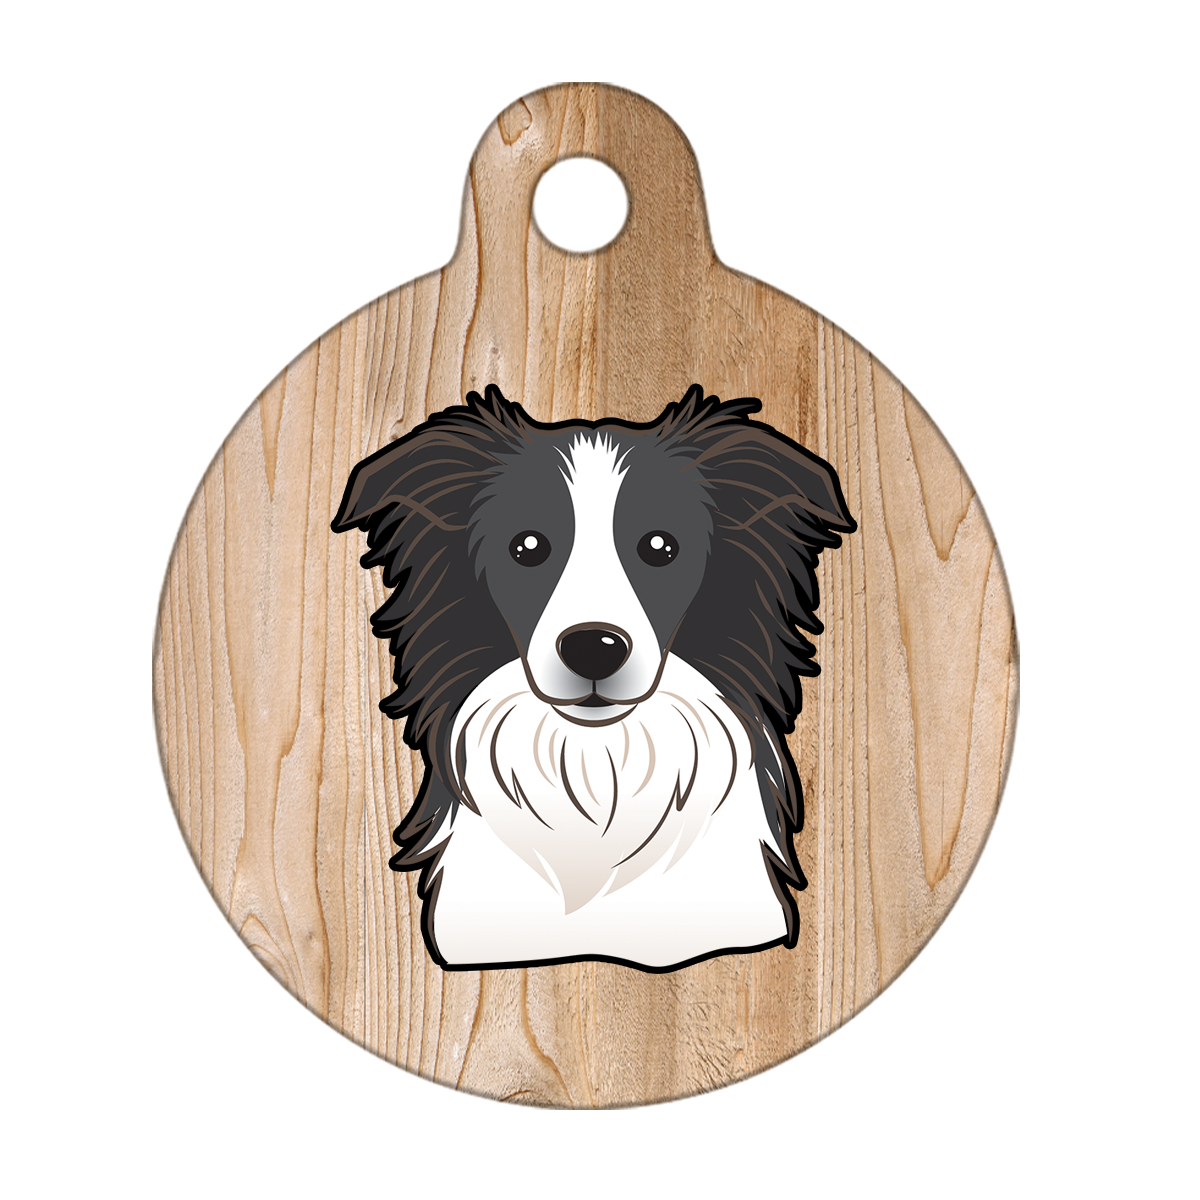 25mm Diameter Small Size - Border Collie Dog